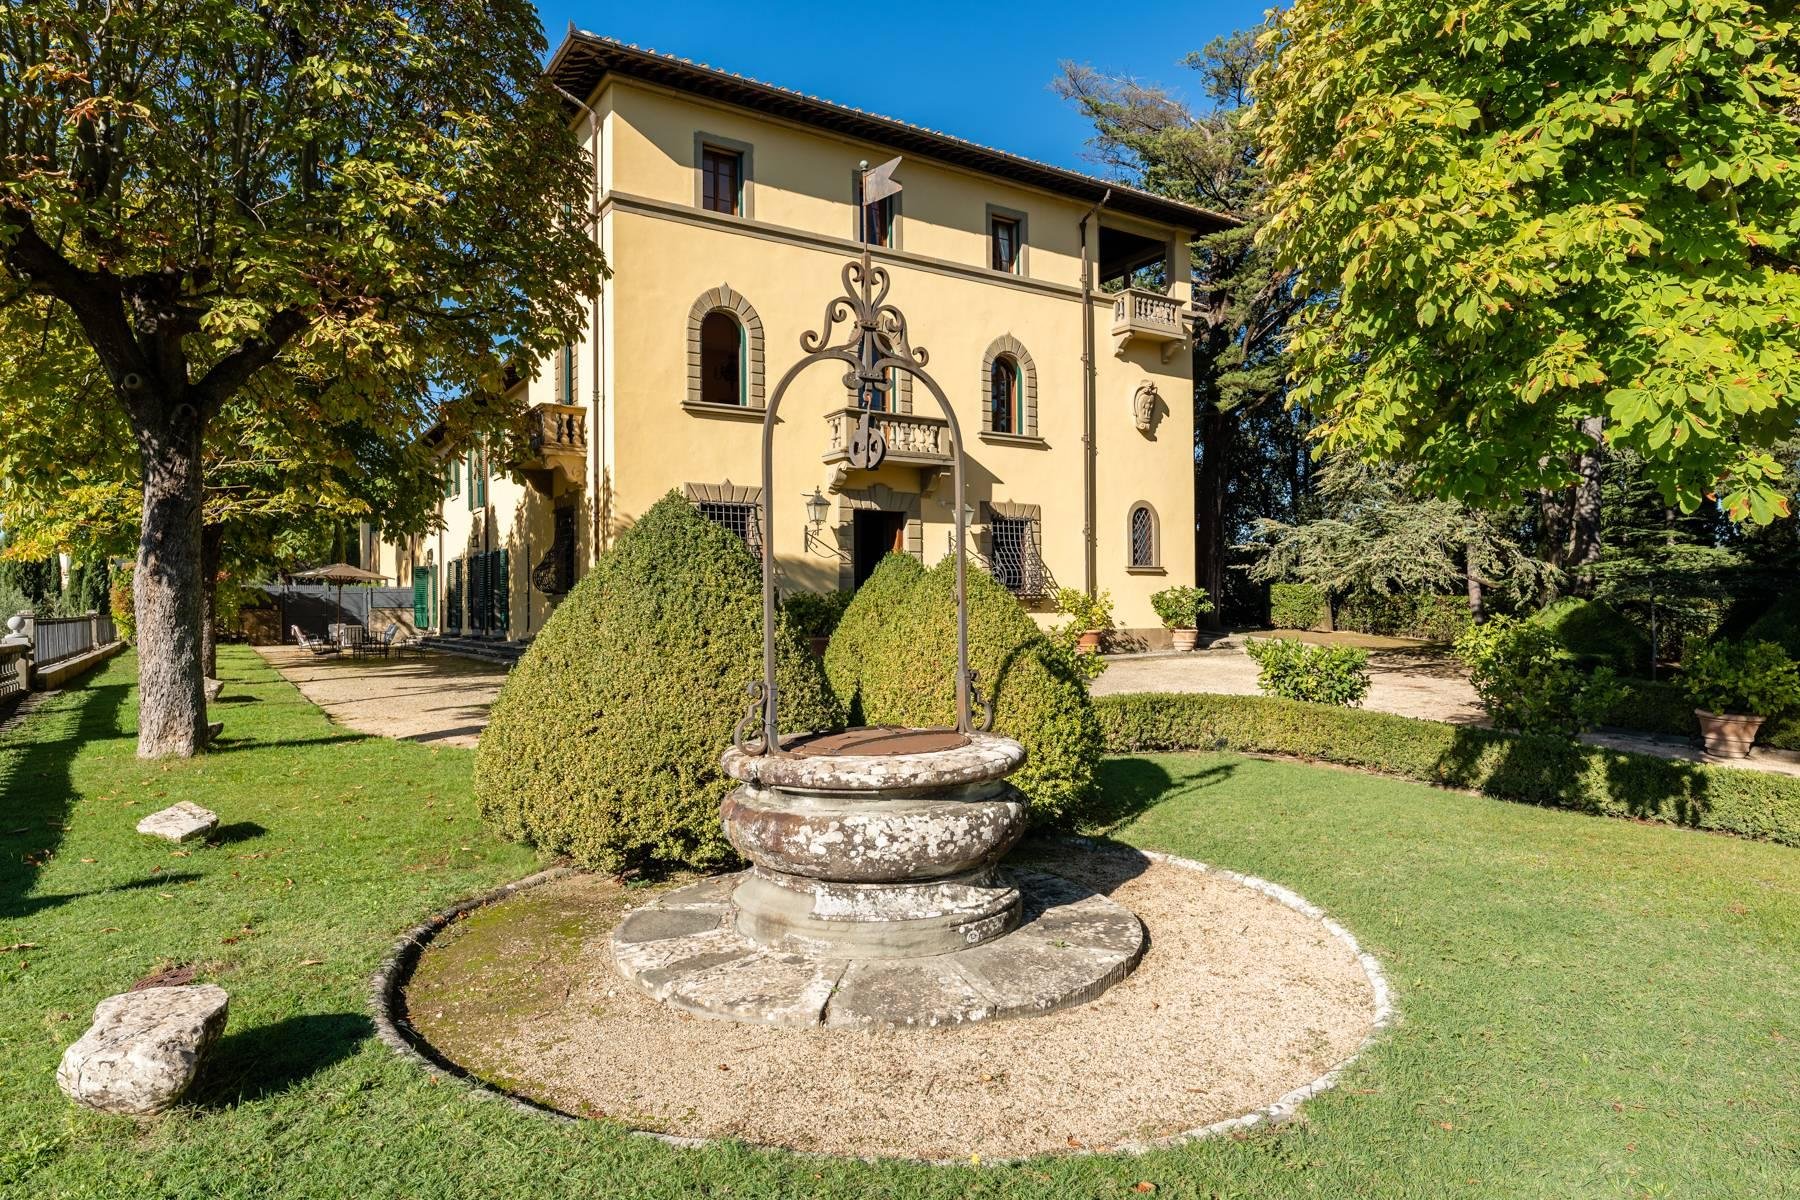 Francis York luxurious-tuscan-villa-for-sale-in-the-heart-of-chianti-italy-2.jpg